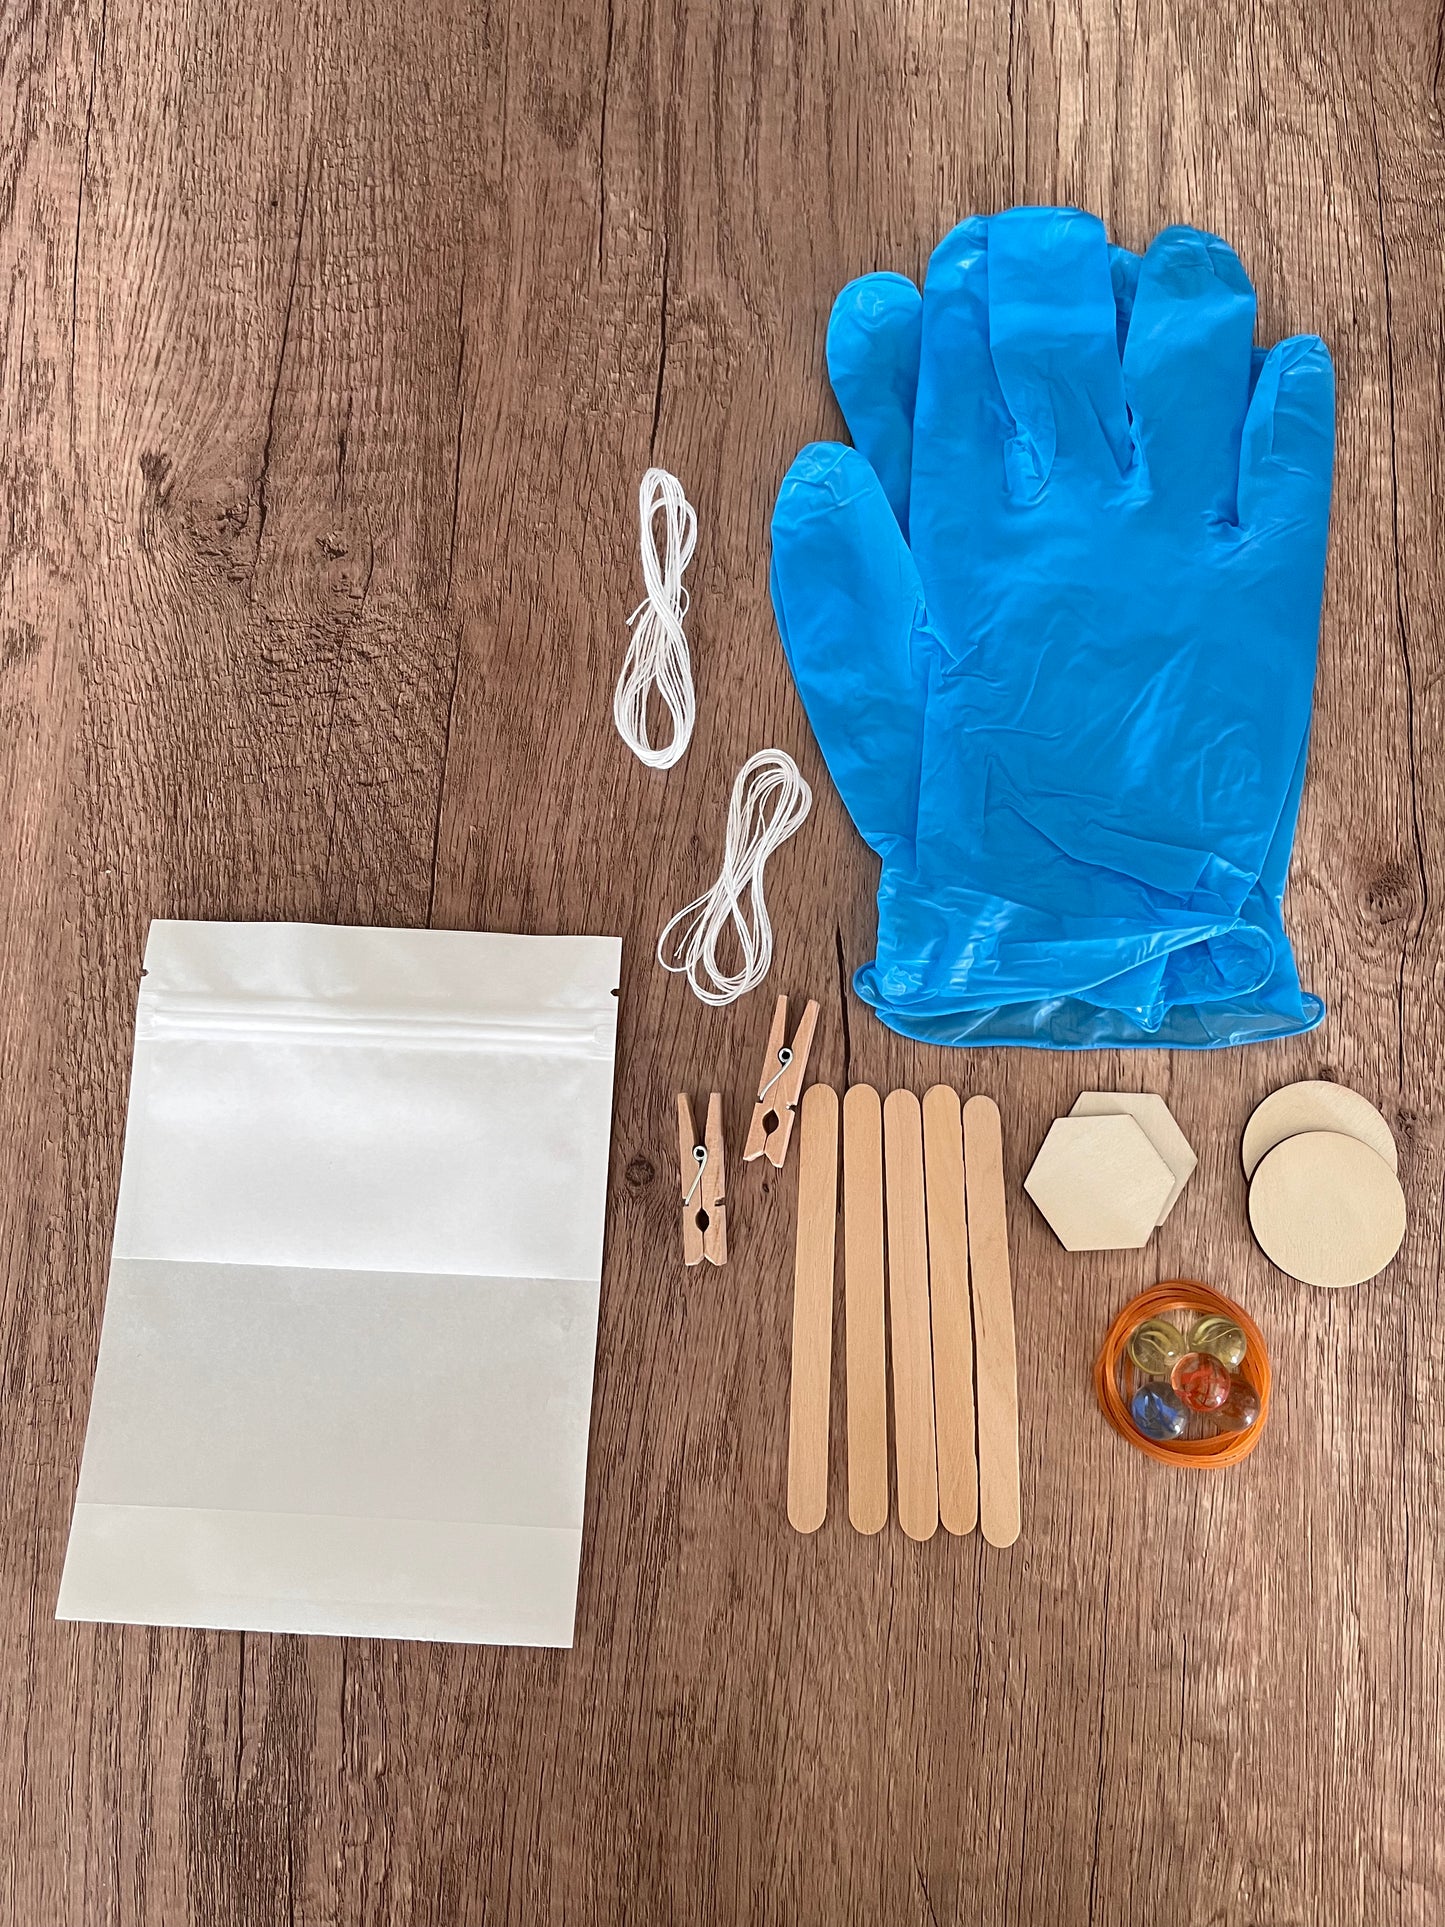 A set of natural Indigo dye DIY kit for tie dye lovers - with 200g pure natural indigo mud and tie dye tools.